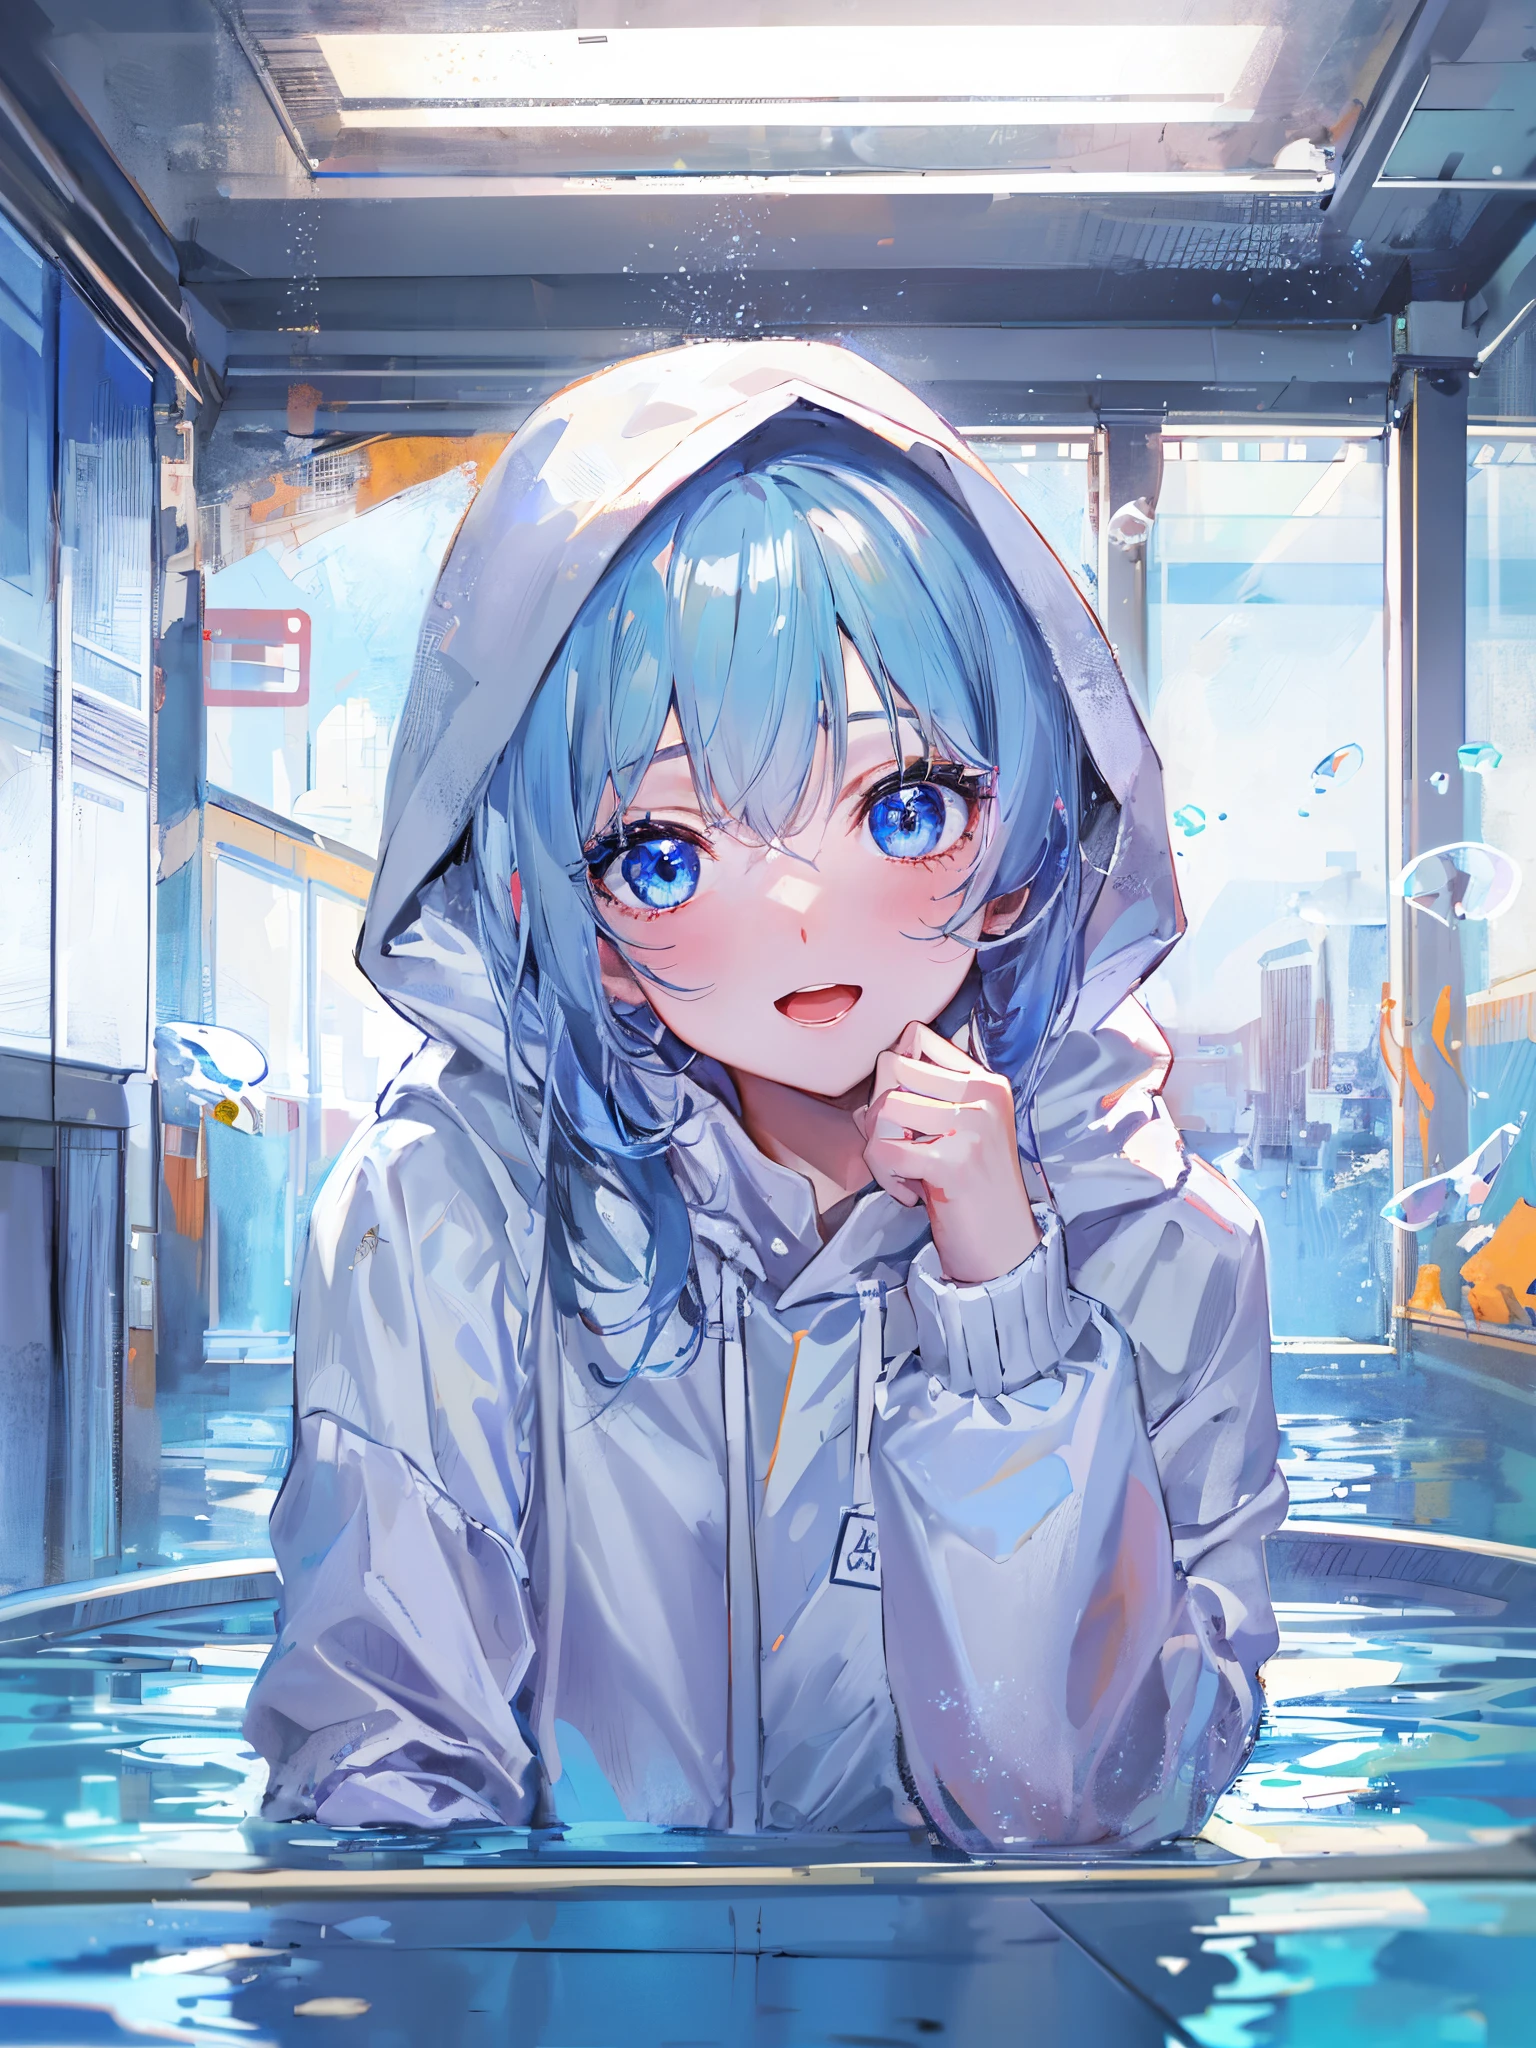 ((top-quality)), ((​masterpiece)), ((Ultra-detail)), (Extremely delicate and beautiful), girl with, solo, cold attitude,((White hoodie)),She is very(relax)with  the(Settled down)Looks,depth of fields,Evil smile,Bubble, under the water, Air bubble,Underwater world bright light blue eyes,inner color with bright gray hair and light blue tips,,,,,,,,,,,,,,,,,,,,,,Cold background,Bob Hair - Linear Art, shortpants、knee high socks、White uniform like 、Light blue ribbon ties、Clothes are sheer、The hand in my right pocket is like a sapphire,Fronllesse Blue, A small blue light was floating、fantastic eyes、selfy,Self-shot、Bangs fall on the eyes, give a sexy impression.